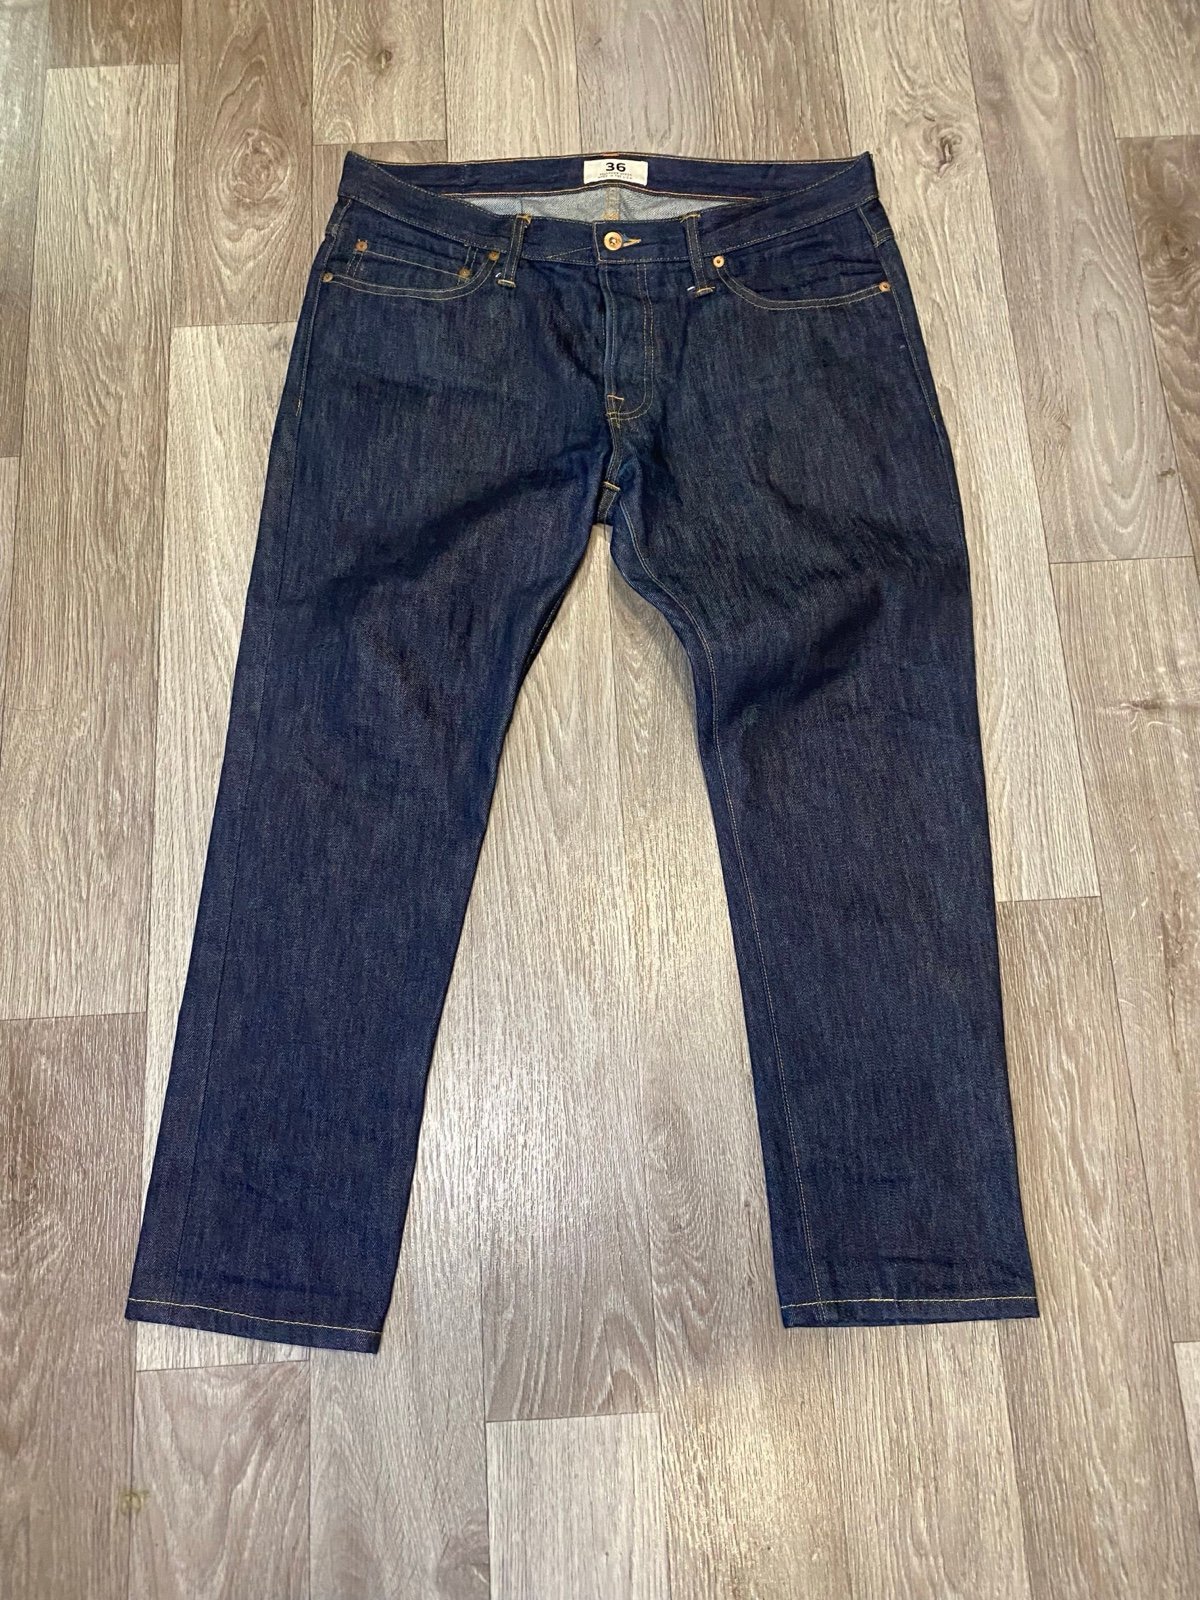 where to buy  Tellason Stock Jeans Mens 36 Blue Straight Leg 100% Cotton Made in USA FNOshlBaP just buy it